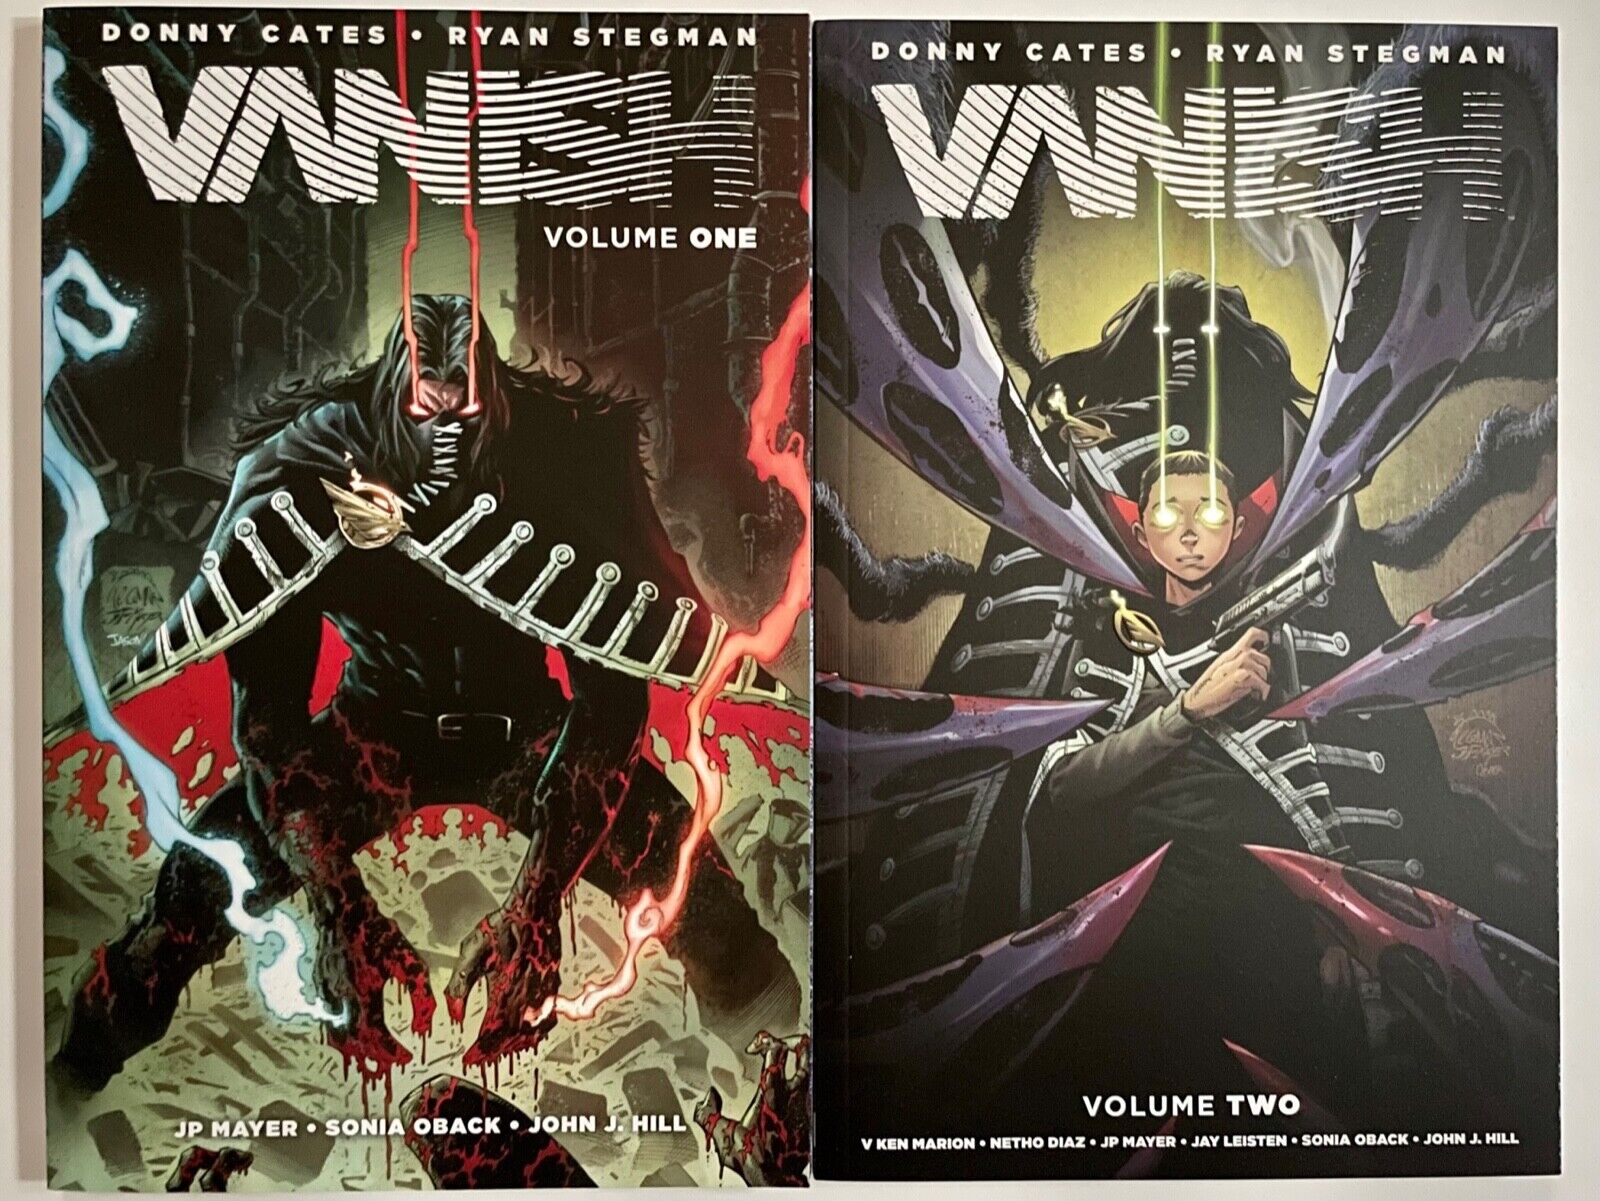 VANISH by Donny Cates Vol 1 + 2 set Softcover TPB Image Comics